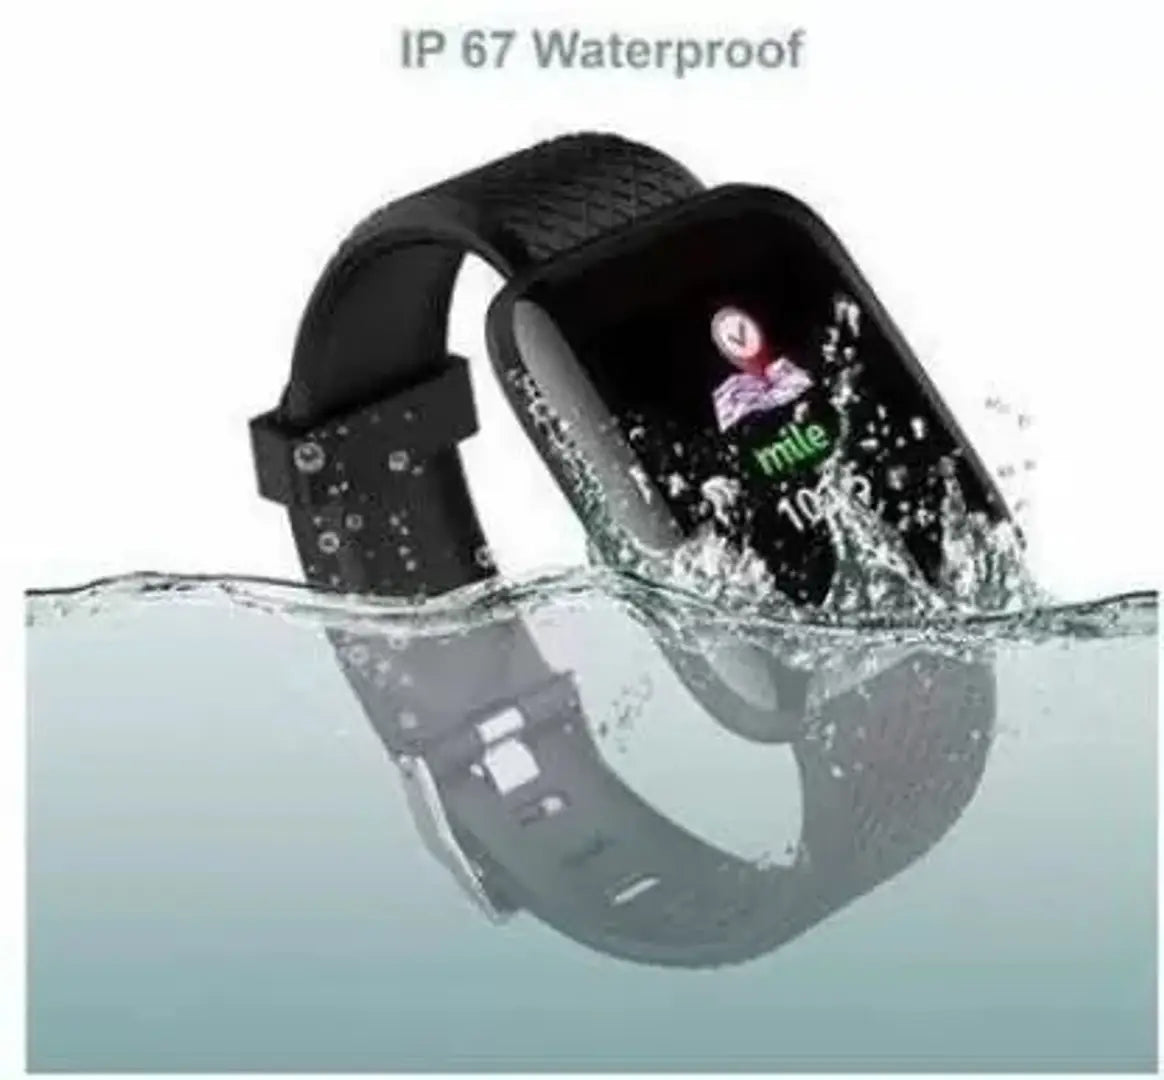 Smart Watch for Men ID116 Plus Waterproof Bluetooth Smartwatch Fitness Band with Heart Rate Sensor Activity Tracker BP Monitor Latest 1.3 LED Display Sports Smart Watch for Kids,Boys  Girls - Black